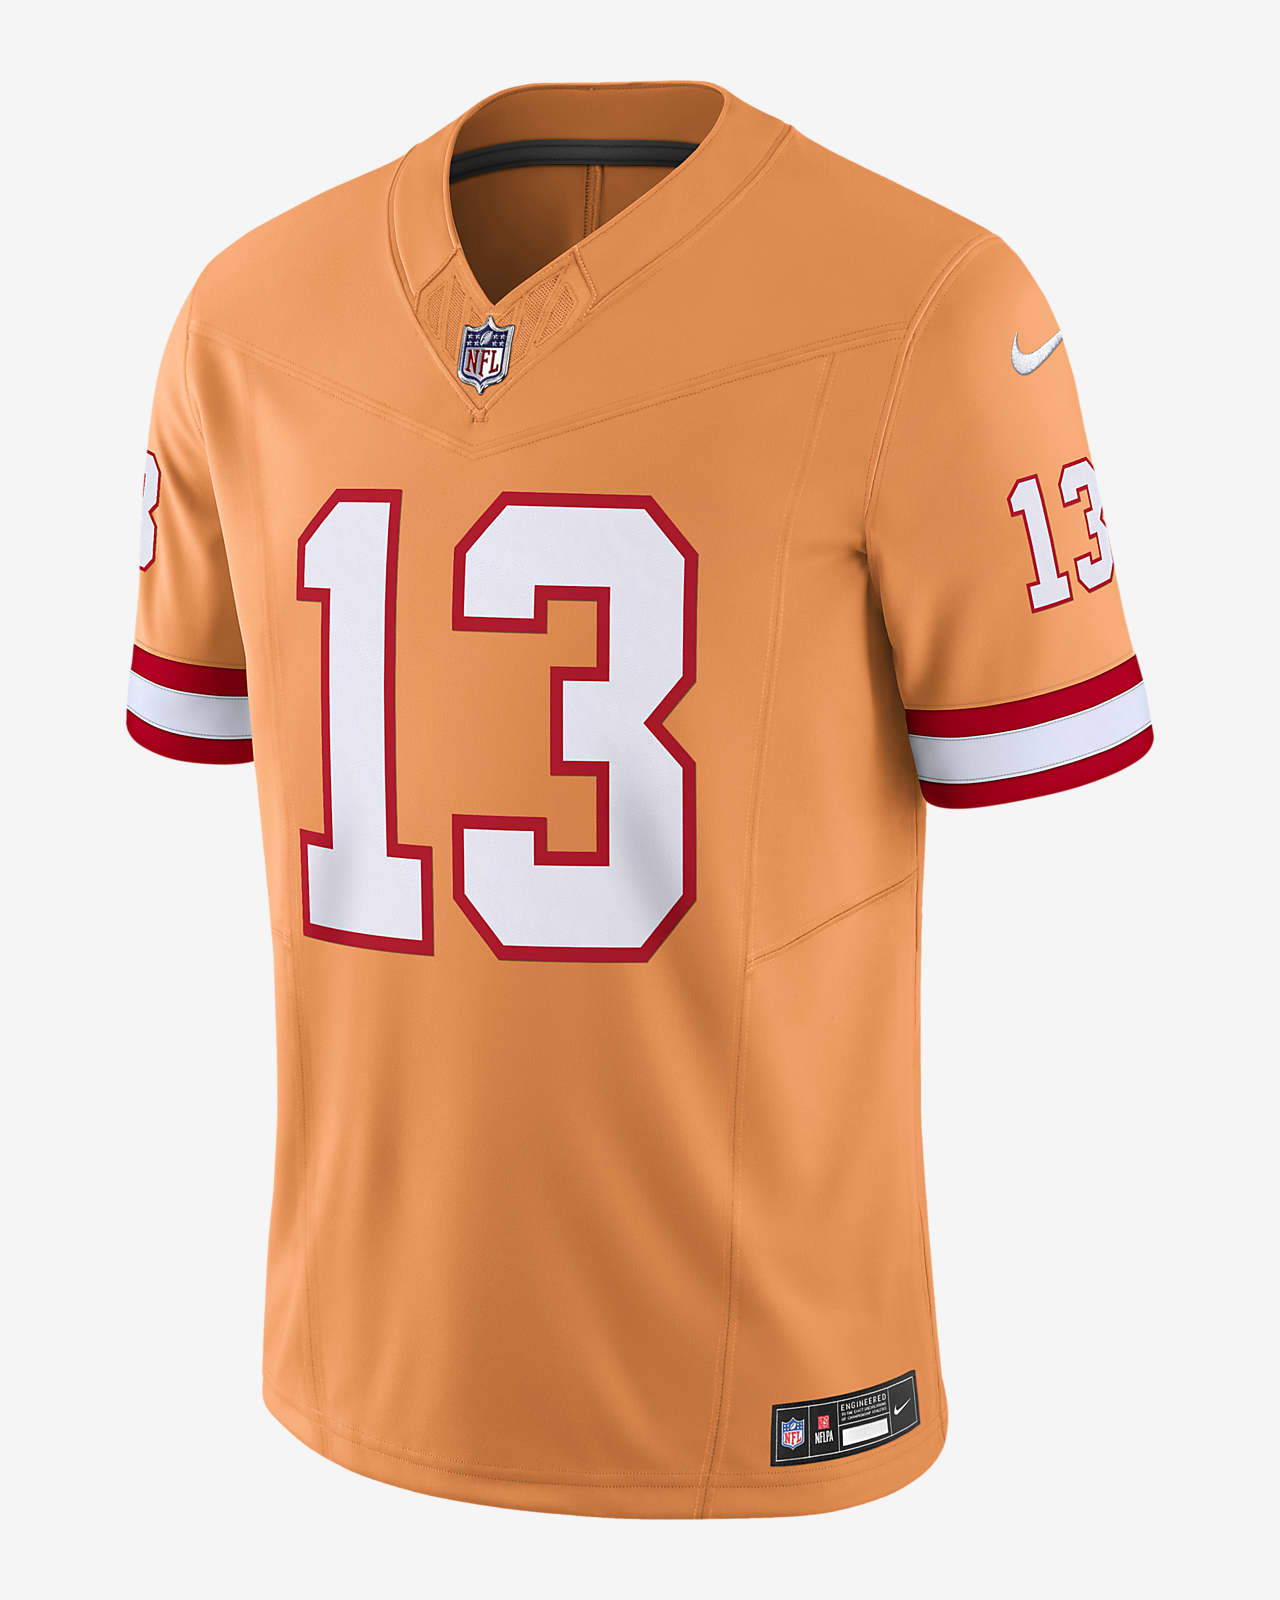 Tom Brady Tampa Bay Buccaneers Nike Men's Dri-Fit NFL Limited Football Jersey in Orange, Size: Small | 31NM01OS8BF-6Y0